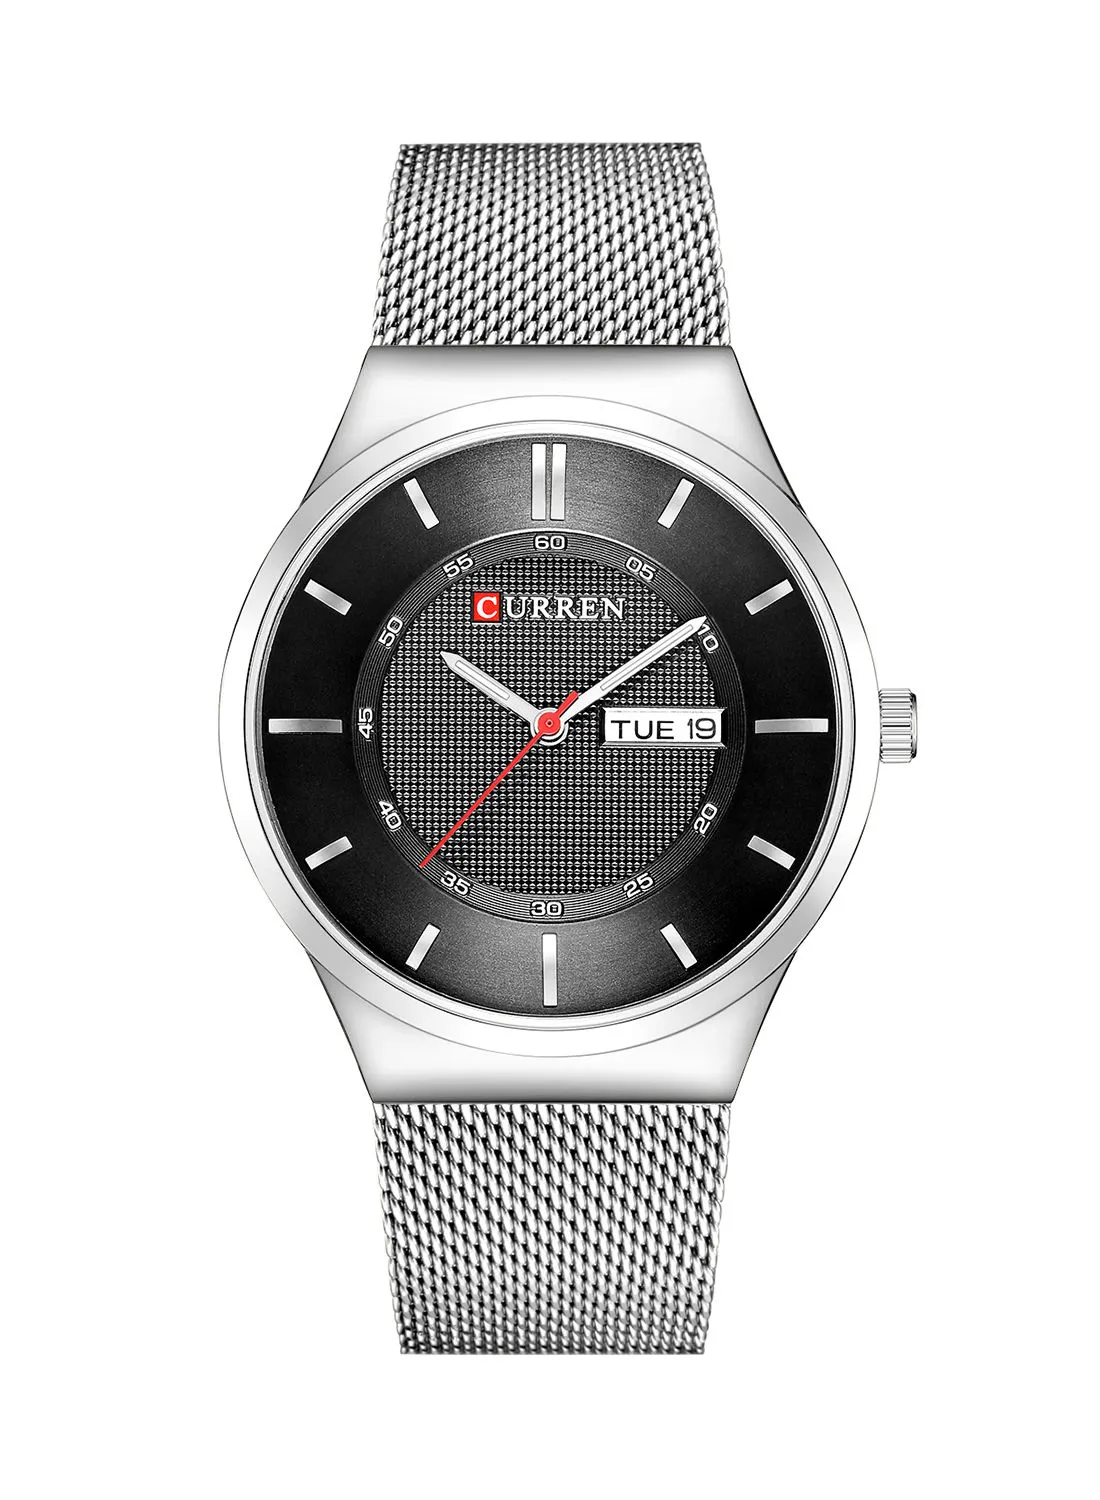 CURREN Men's Day-Date Waterproof Stainless Steel Mesh BAnd Casual Quartz Watch 8311 - 39 mm - Silver